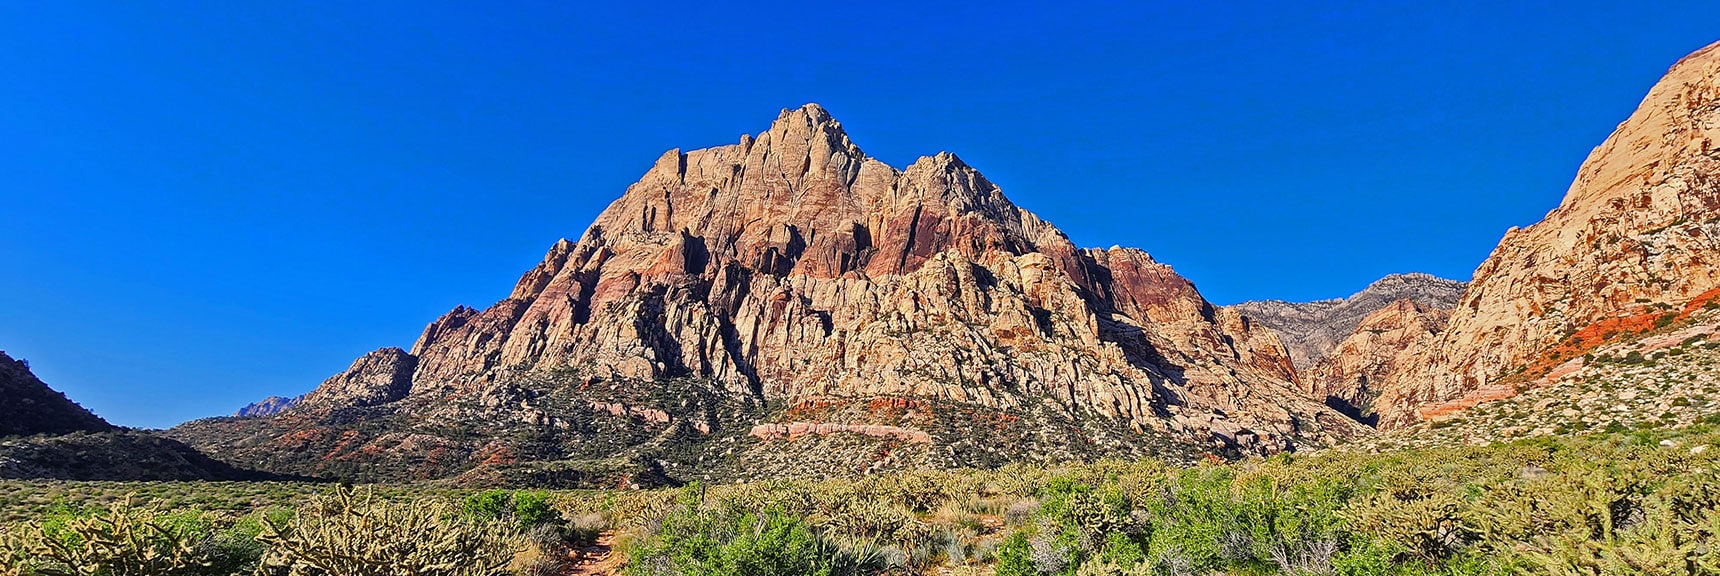 NE Mt. Wilson from Knoll Trail | Knoll Trail | Red Rock Canyon National Conservation Area, Nevada | David Smith | LasVegasAreaTrails.com